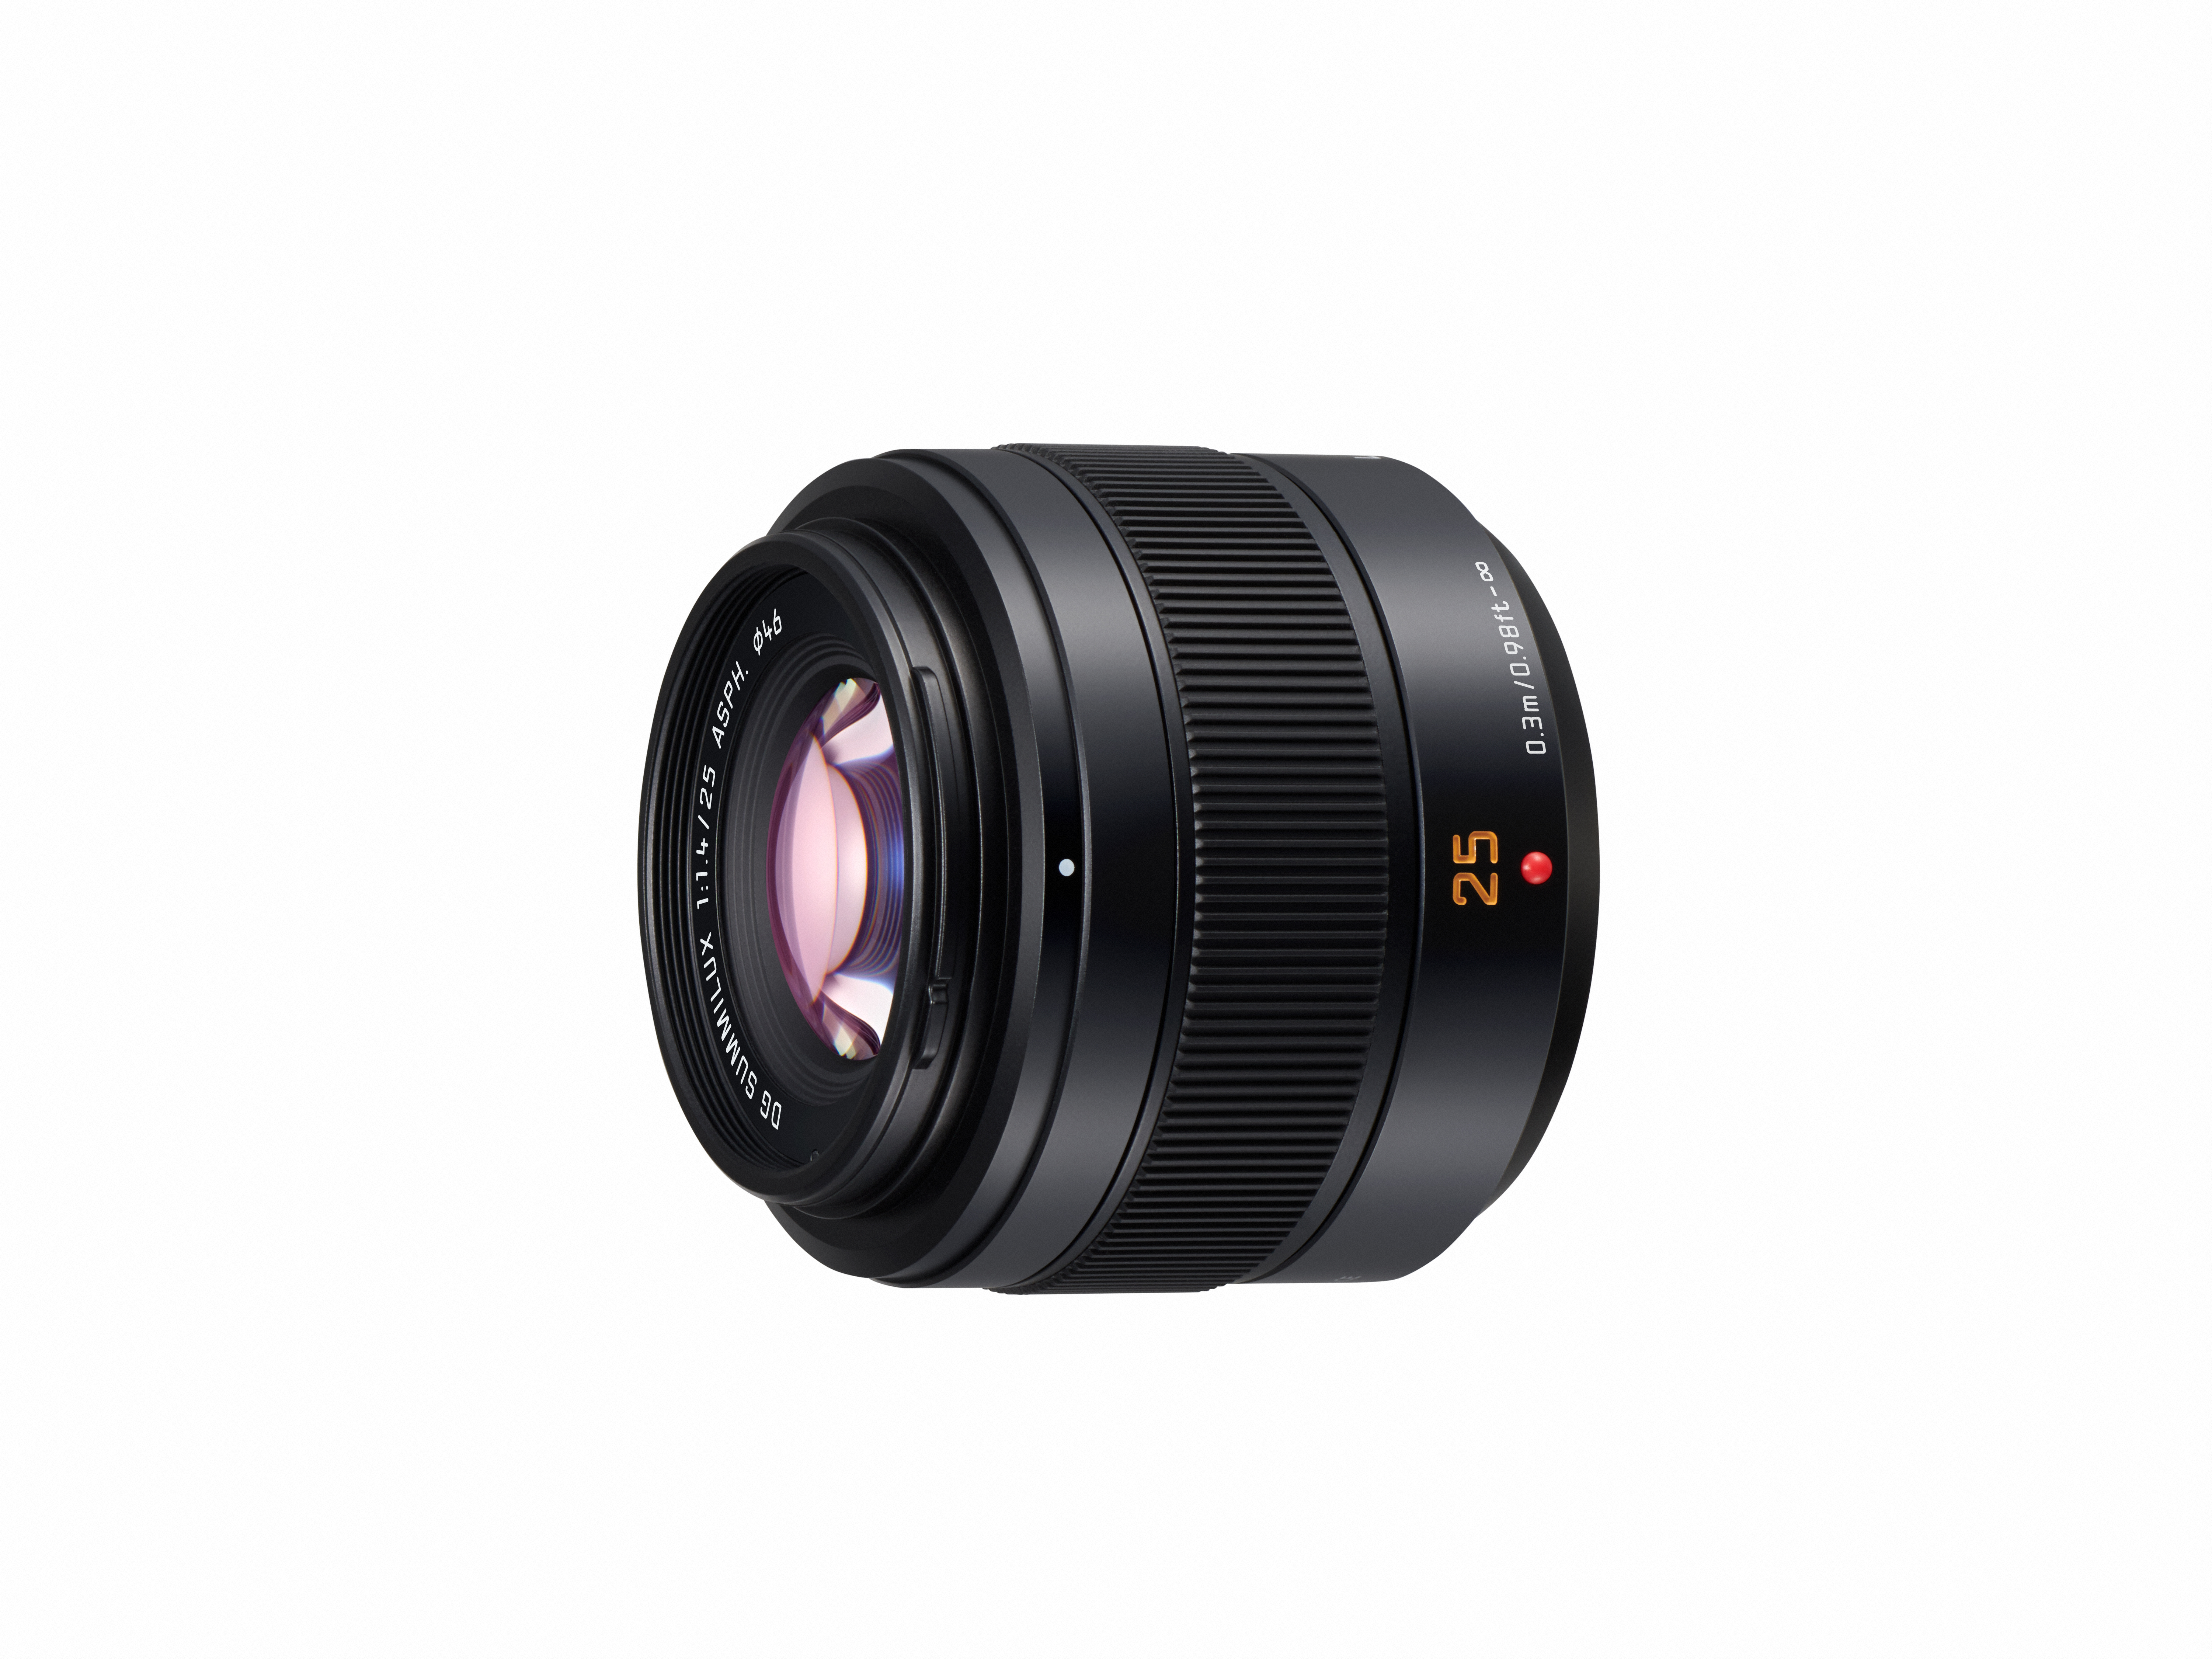 command pear Chamber Panasonic's Leica Summilux 25mm F1.4 II ASPH Lens Will Cost $699.99